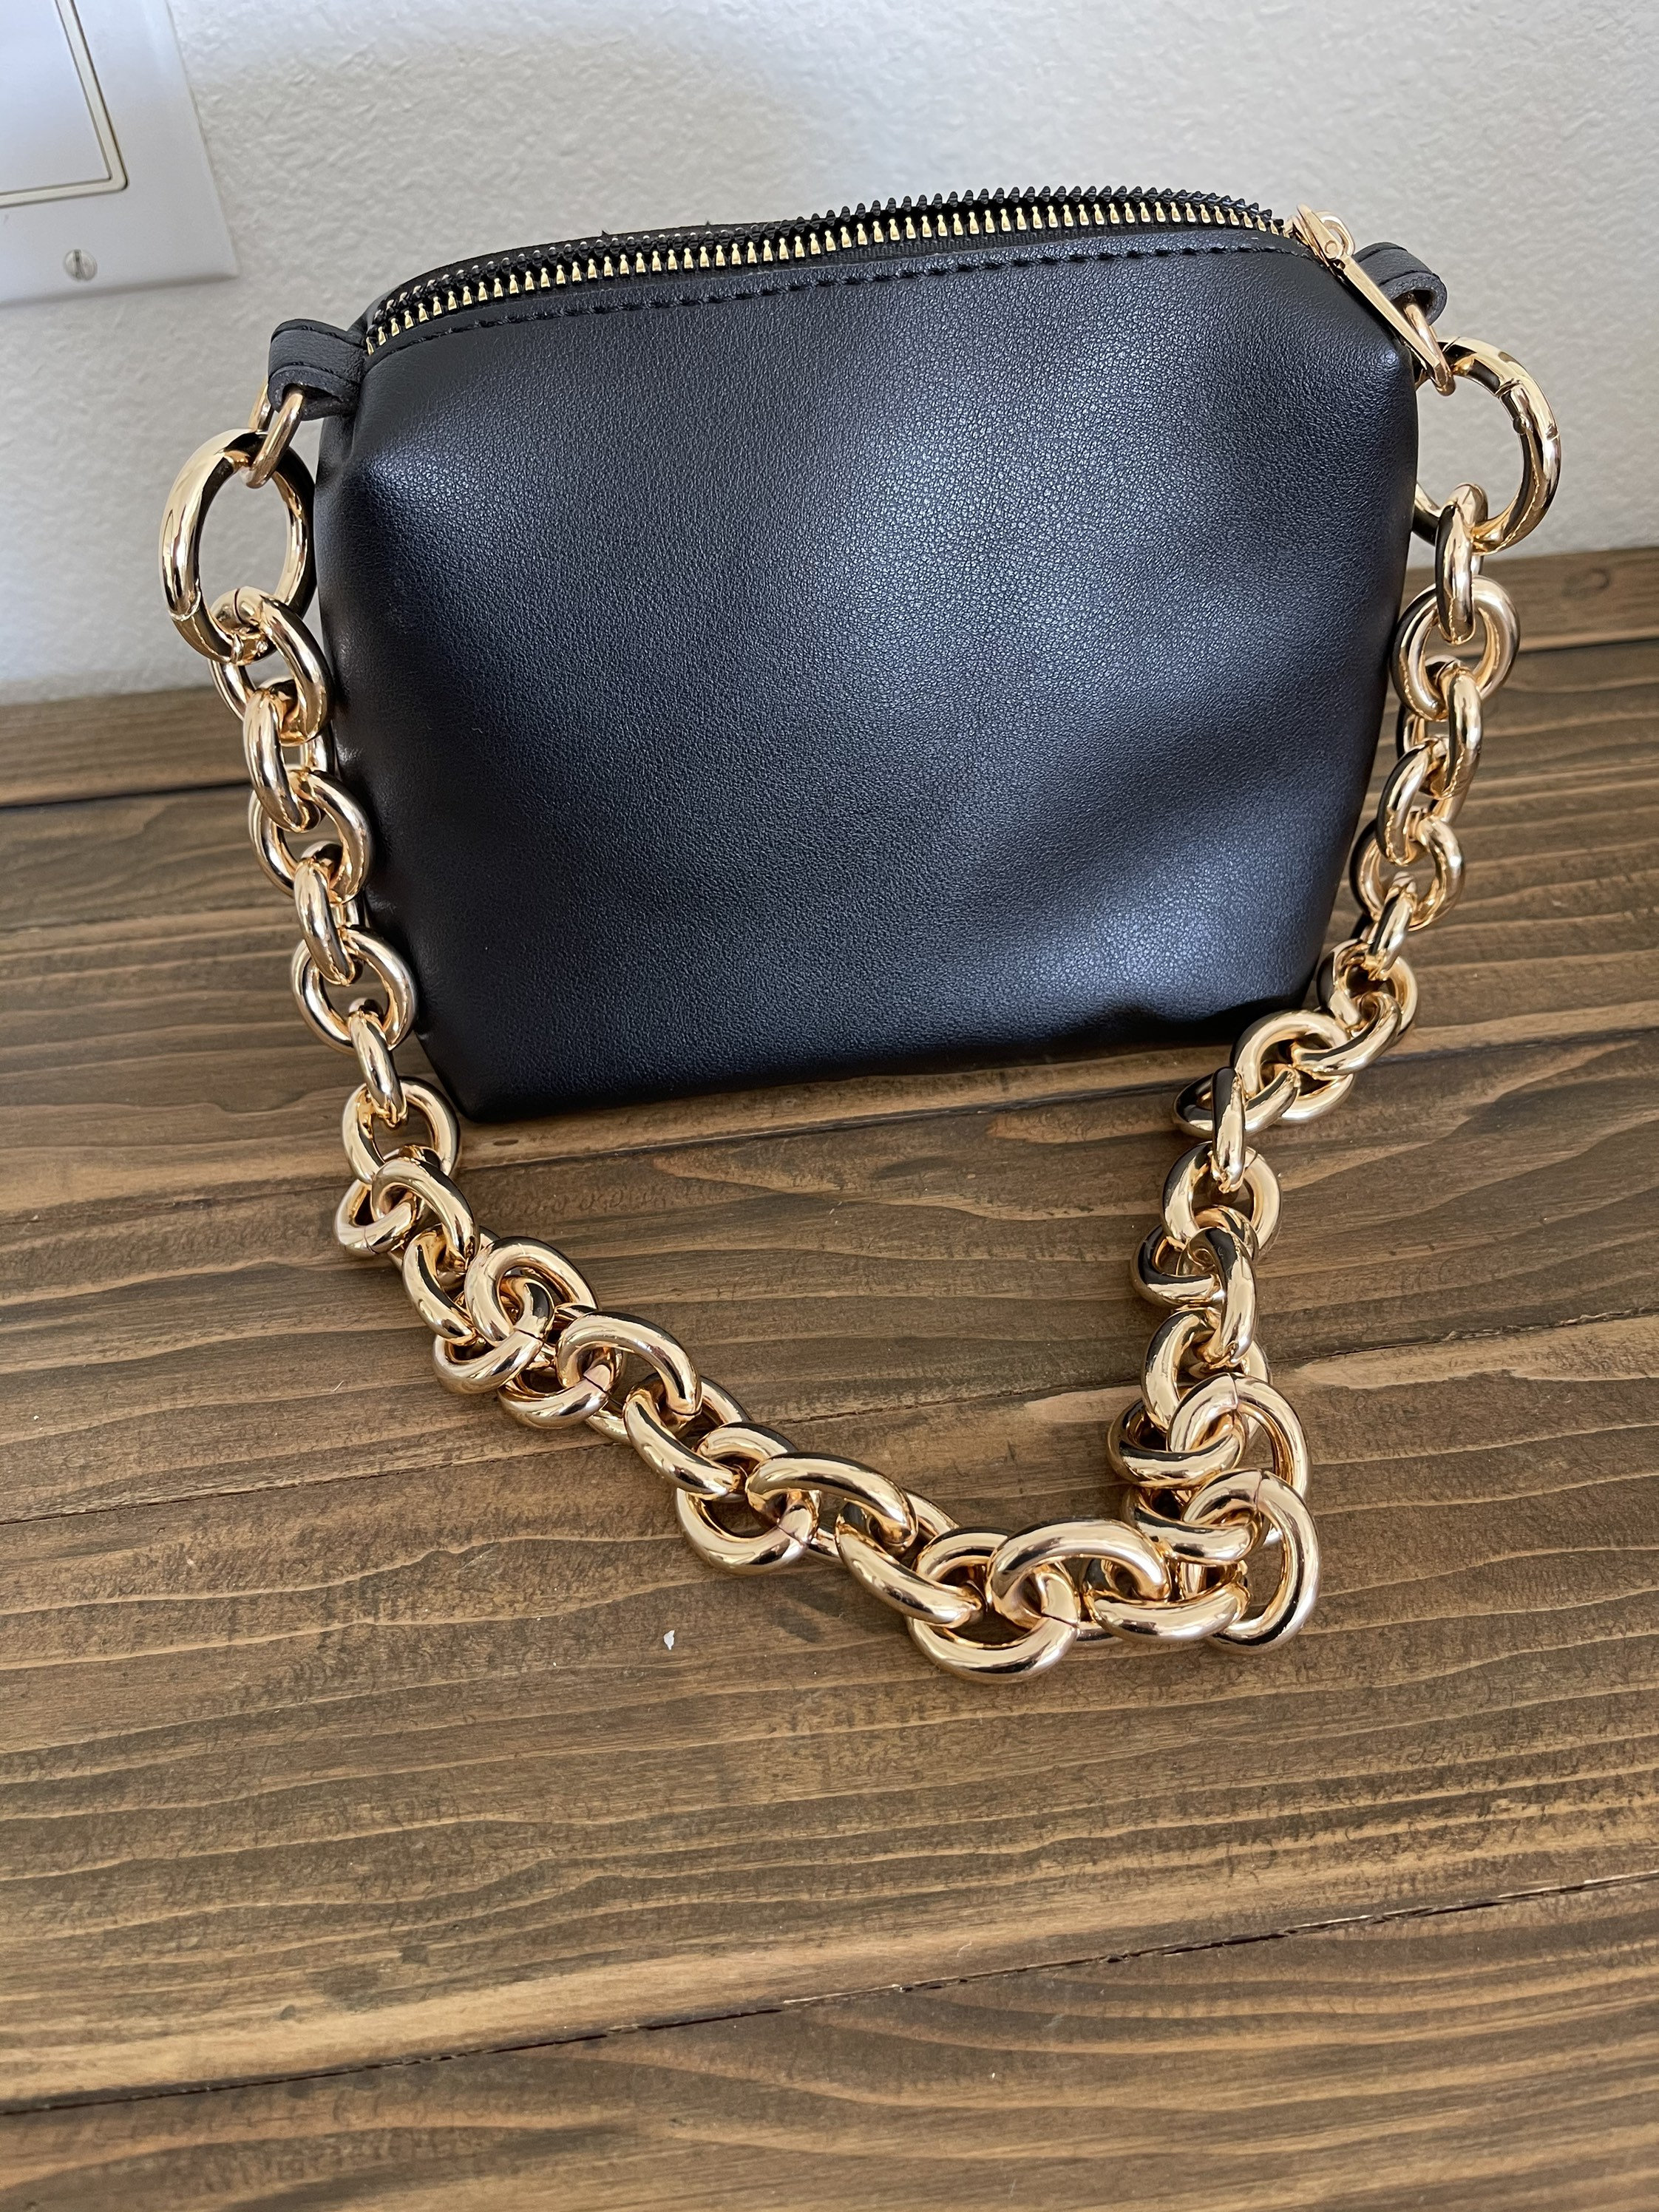 Chain Strap Bag Chain - 6mm Metal Replacement Purse Chain Shoulder  Crossbody Bag Strap for Cluth Sma…See more Chain Strap Bag Chain - 6mm  Metal